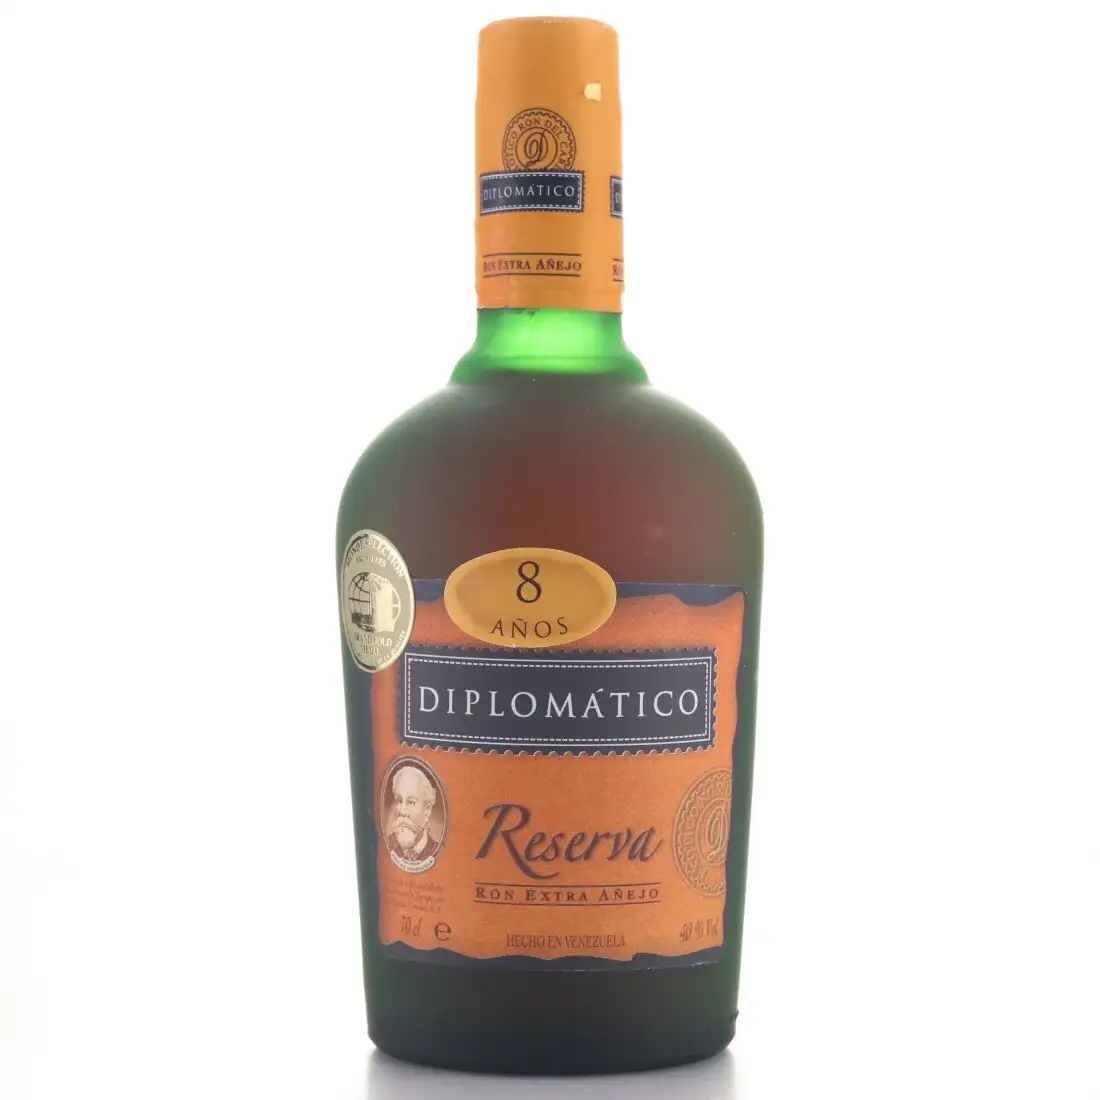 Image of the front of the bottle of the rum Diplomático / Botucal Reserva 8 Años